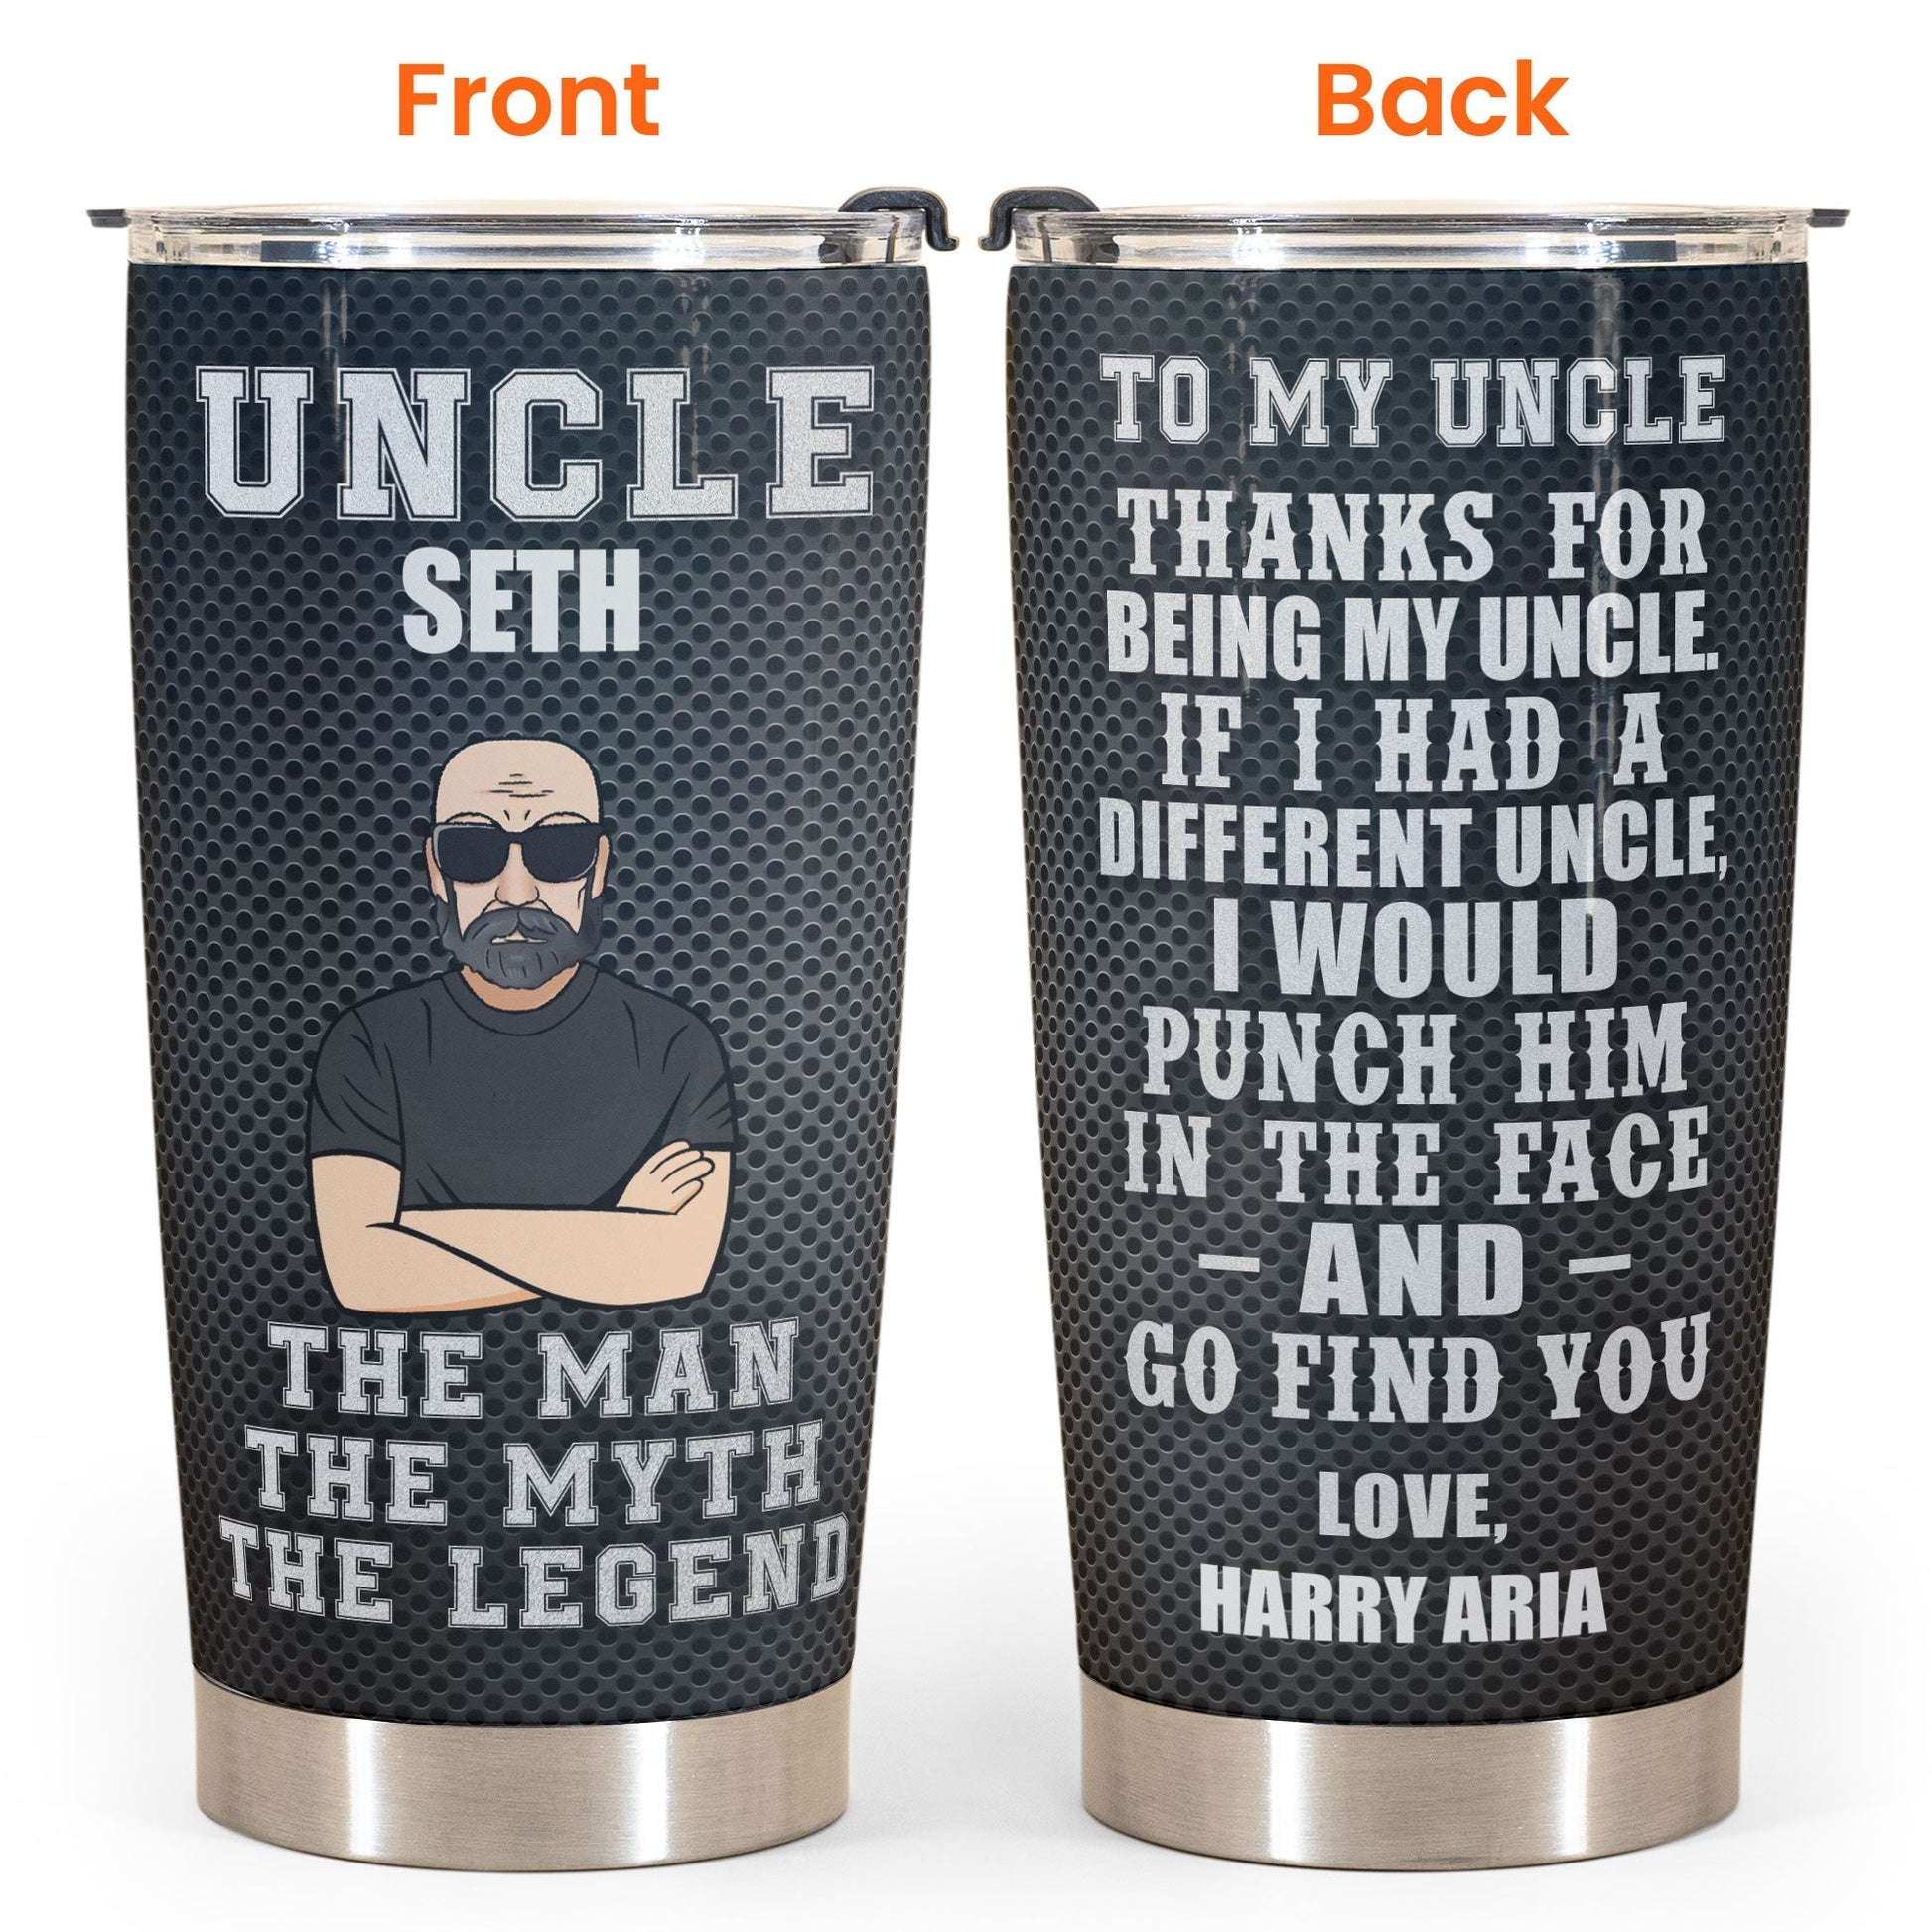 Funny Tumbler Gift, Personalized Name/Text - With Great Beard